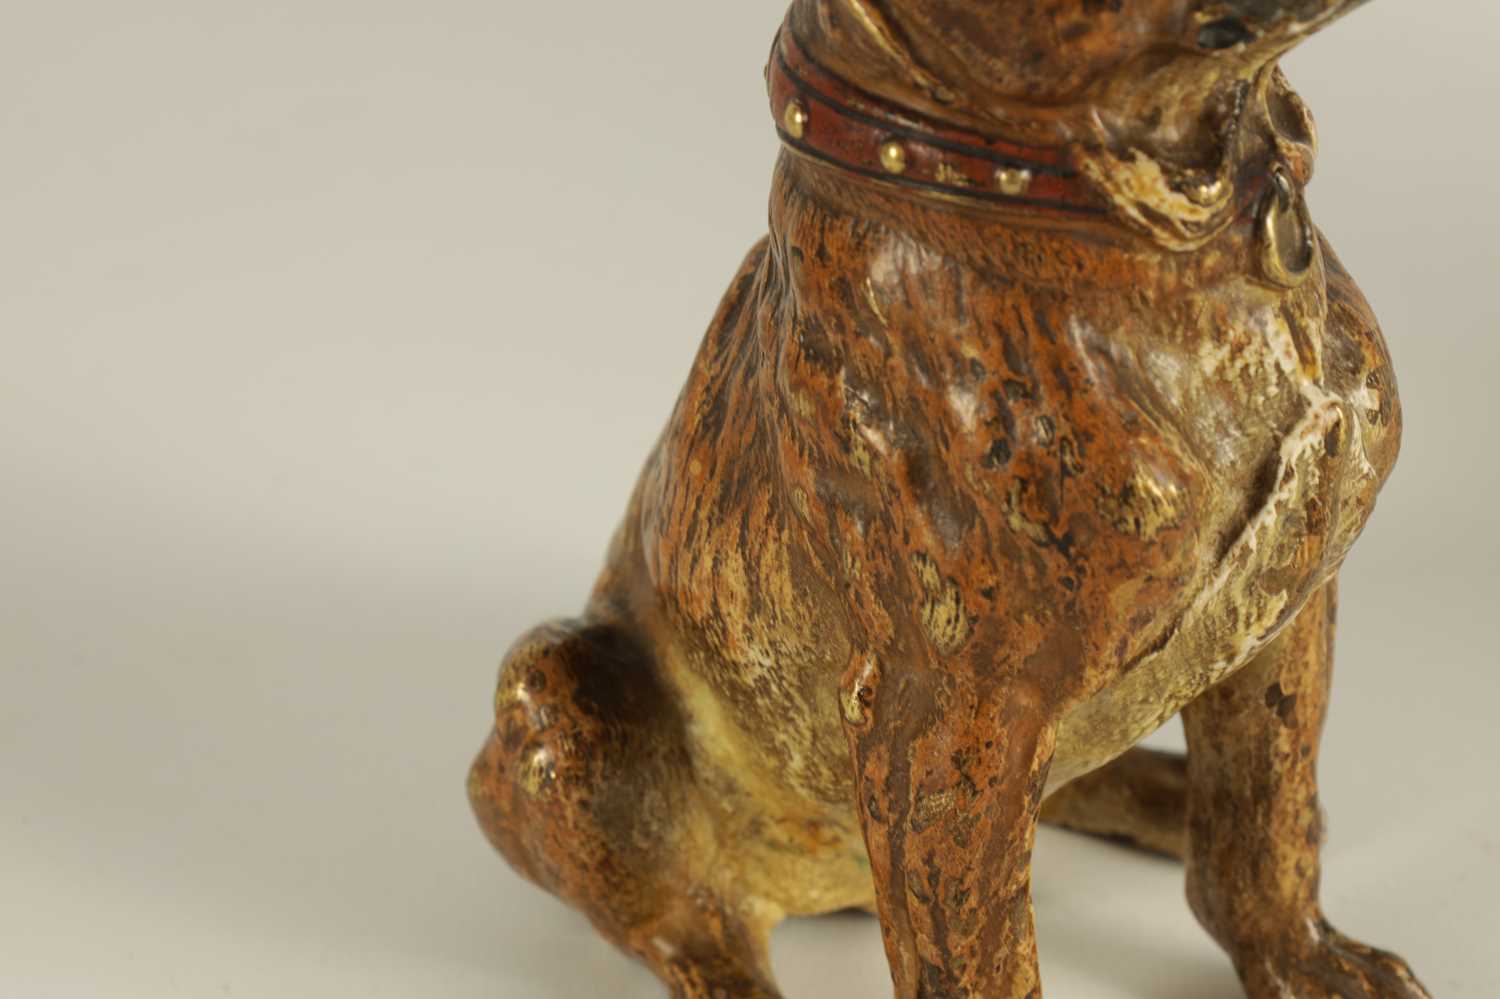 FRANZ BERGMAN, A LATE 19TH CENTURY AUSTRIAN COLD PAINTED BRONZE SCULPTURE OF A BULL MASTIFF - Image 4 of 8